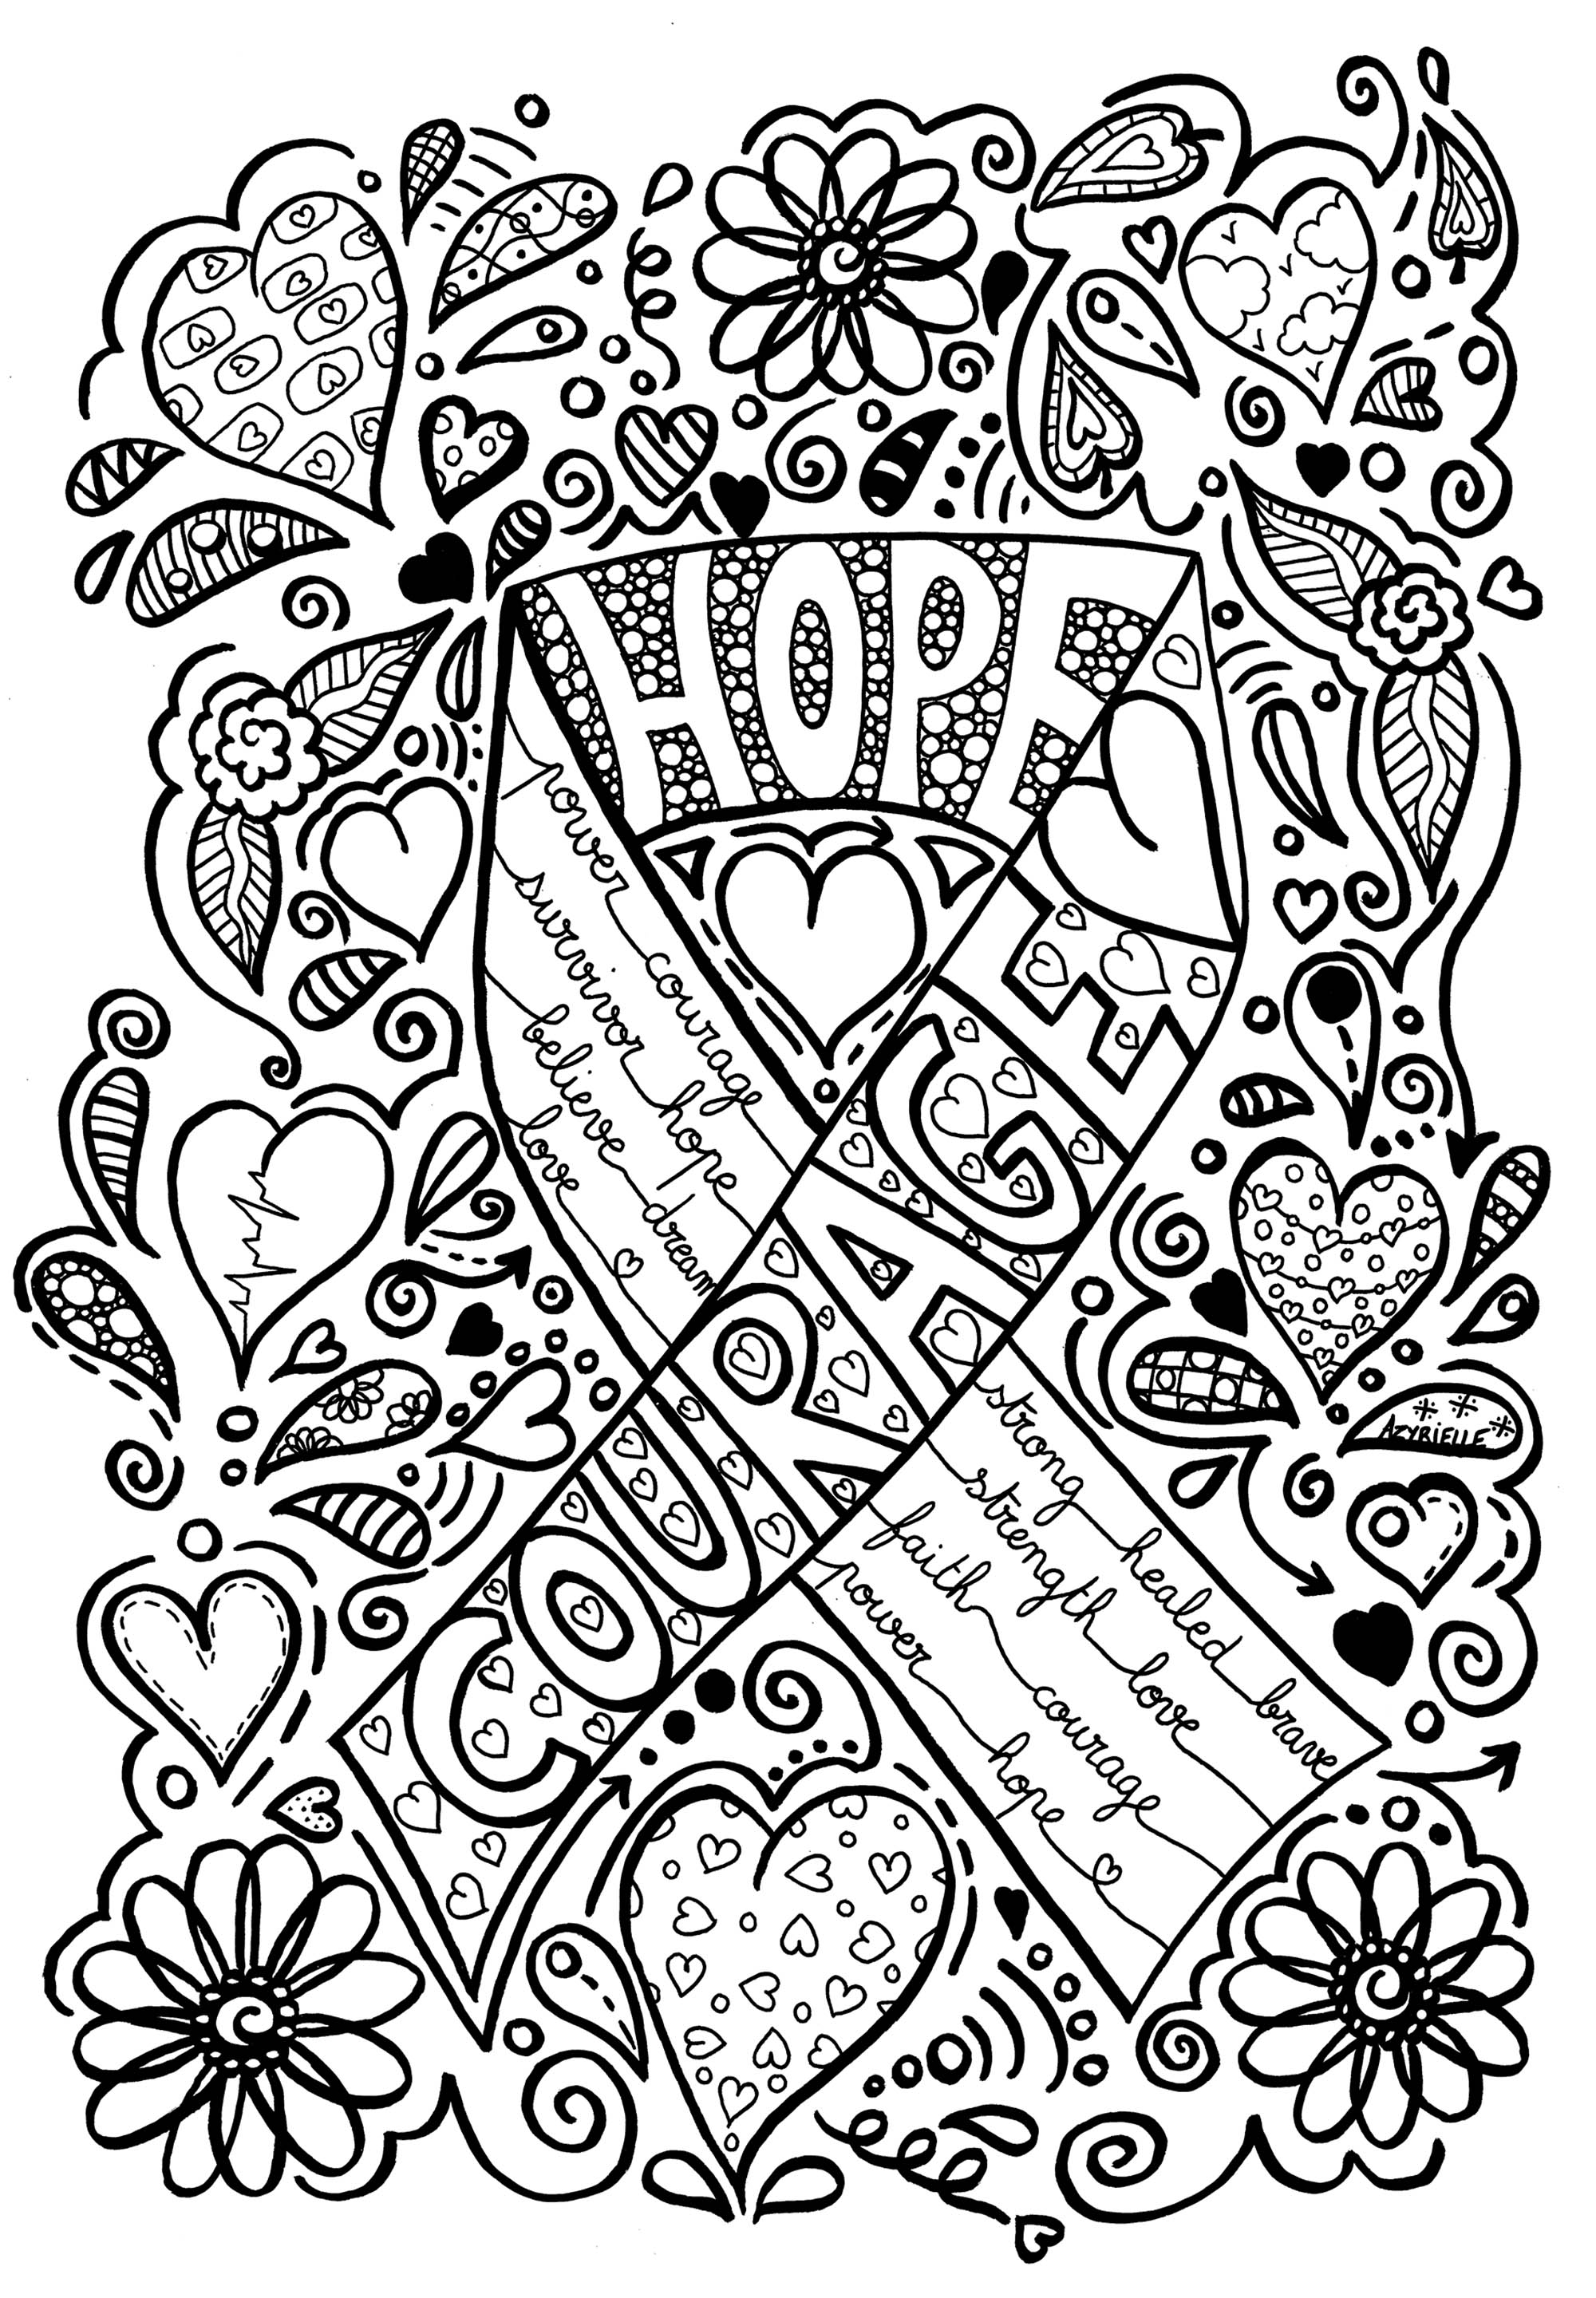 Let's fight against breast cancer ! Original coloring page created on the occasion of October Rose (Breast Cancer Awareness Month)